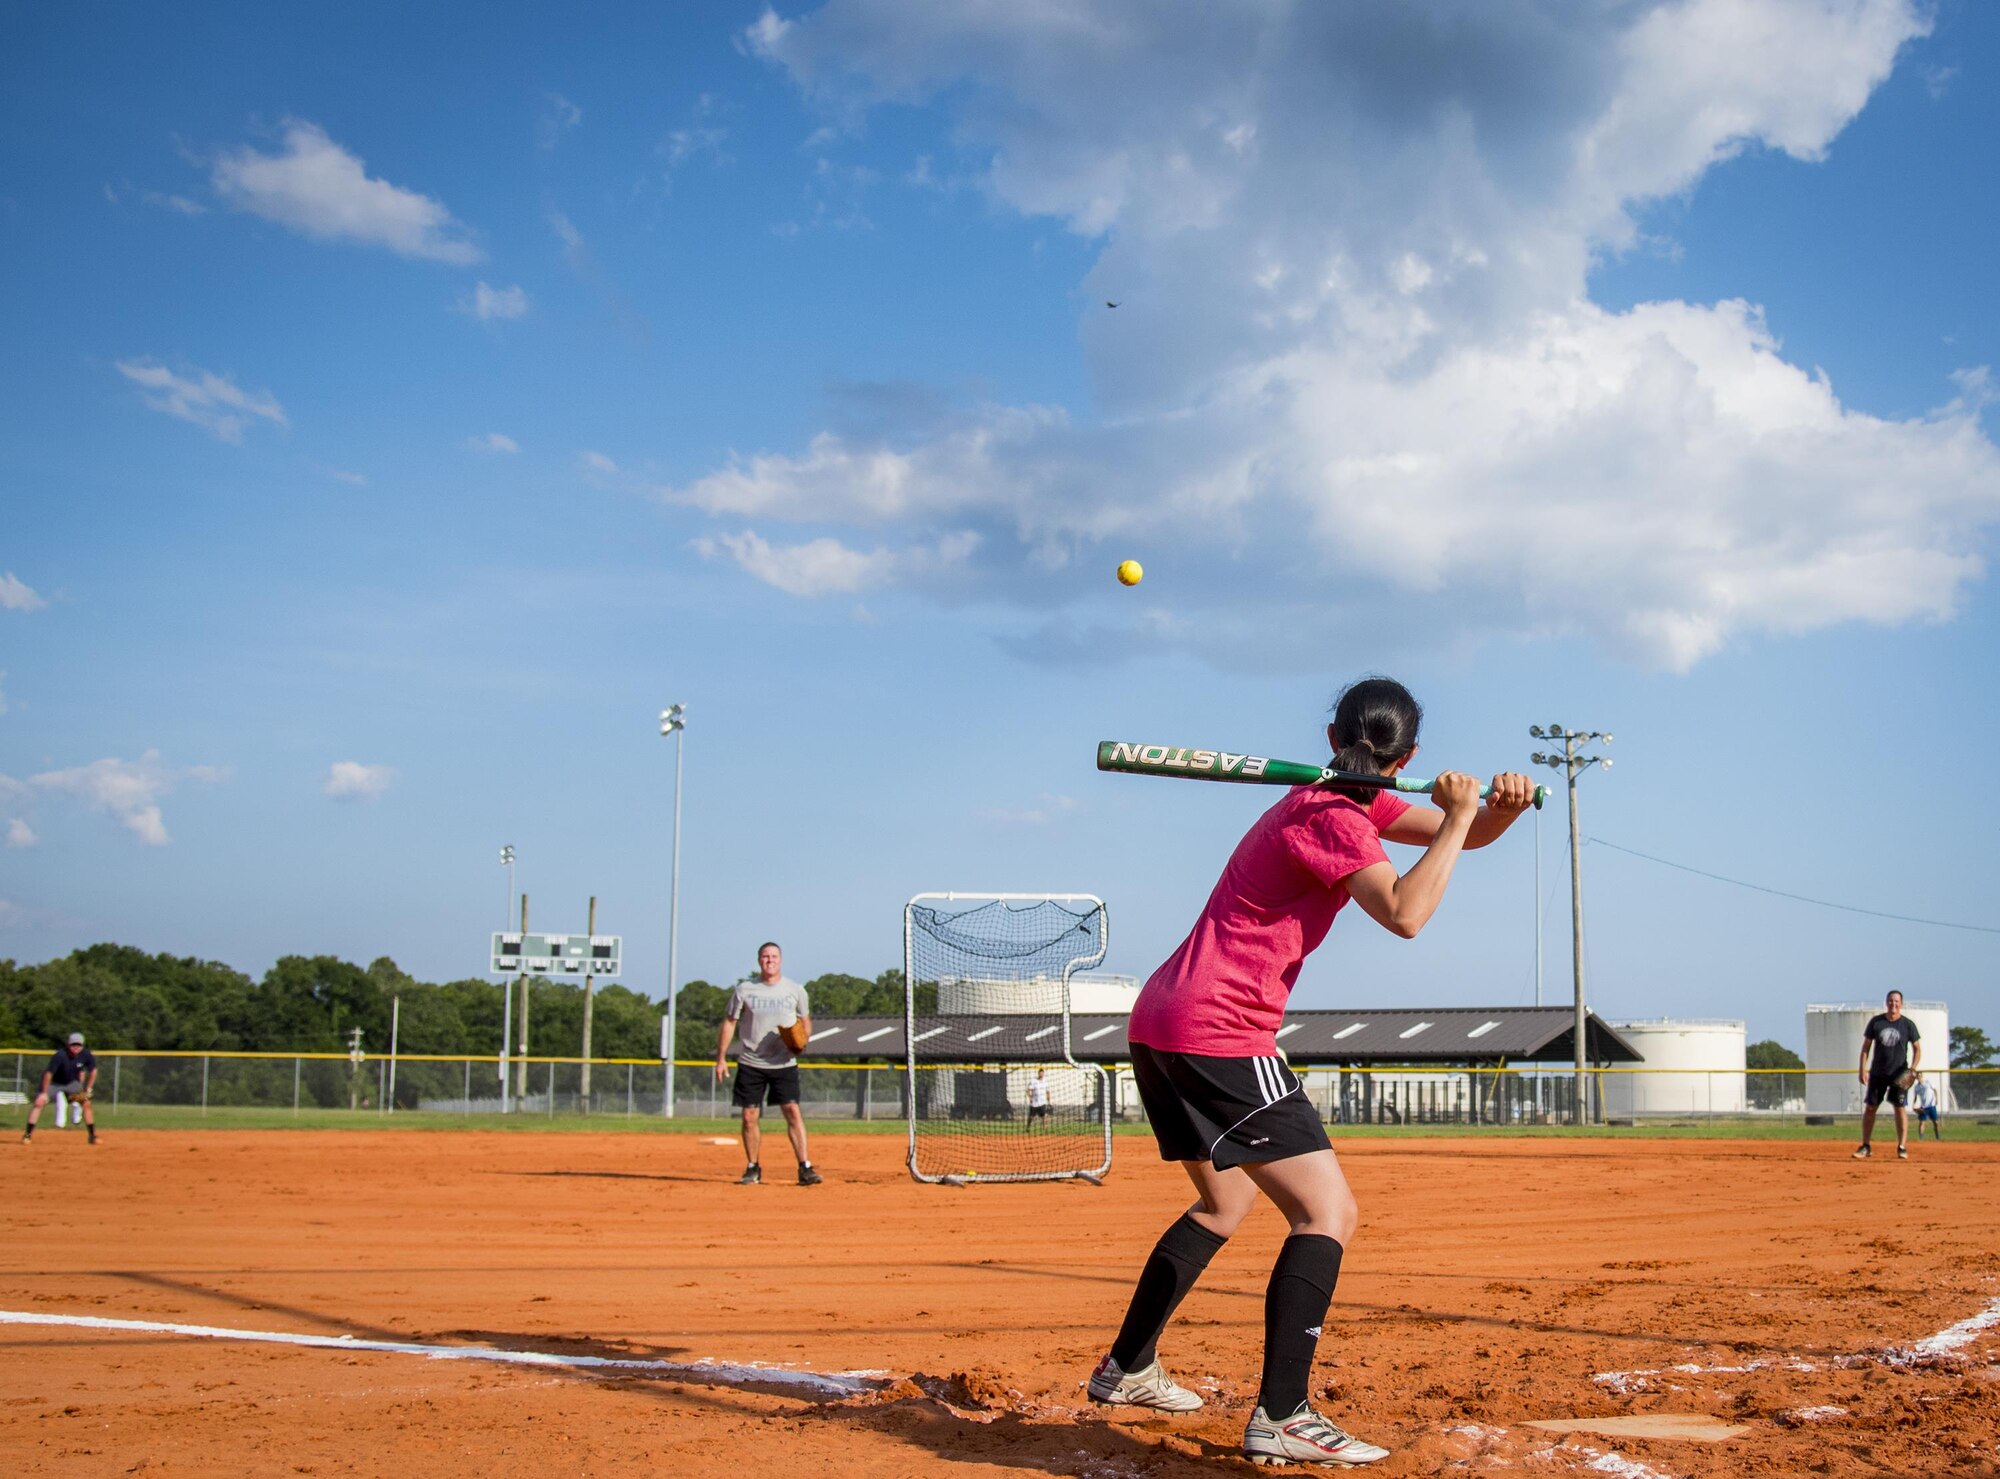 An Air Force Research Lab team member takes her turn at bat during an intramural softball game at Eglin Air Force Base, Fla., June 8.  The Armament Directorate team bashed the hapless AFRL team 14-4 in five innings of play.  (U.S. Air Force photo/Samuel King Jr.)